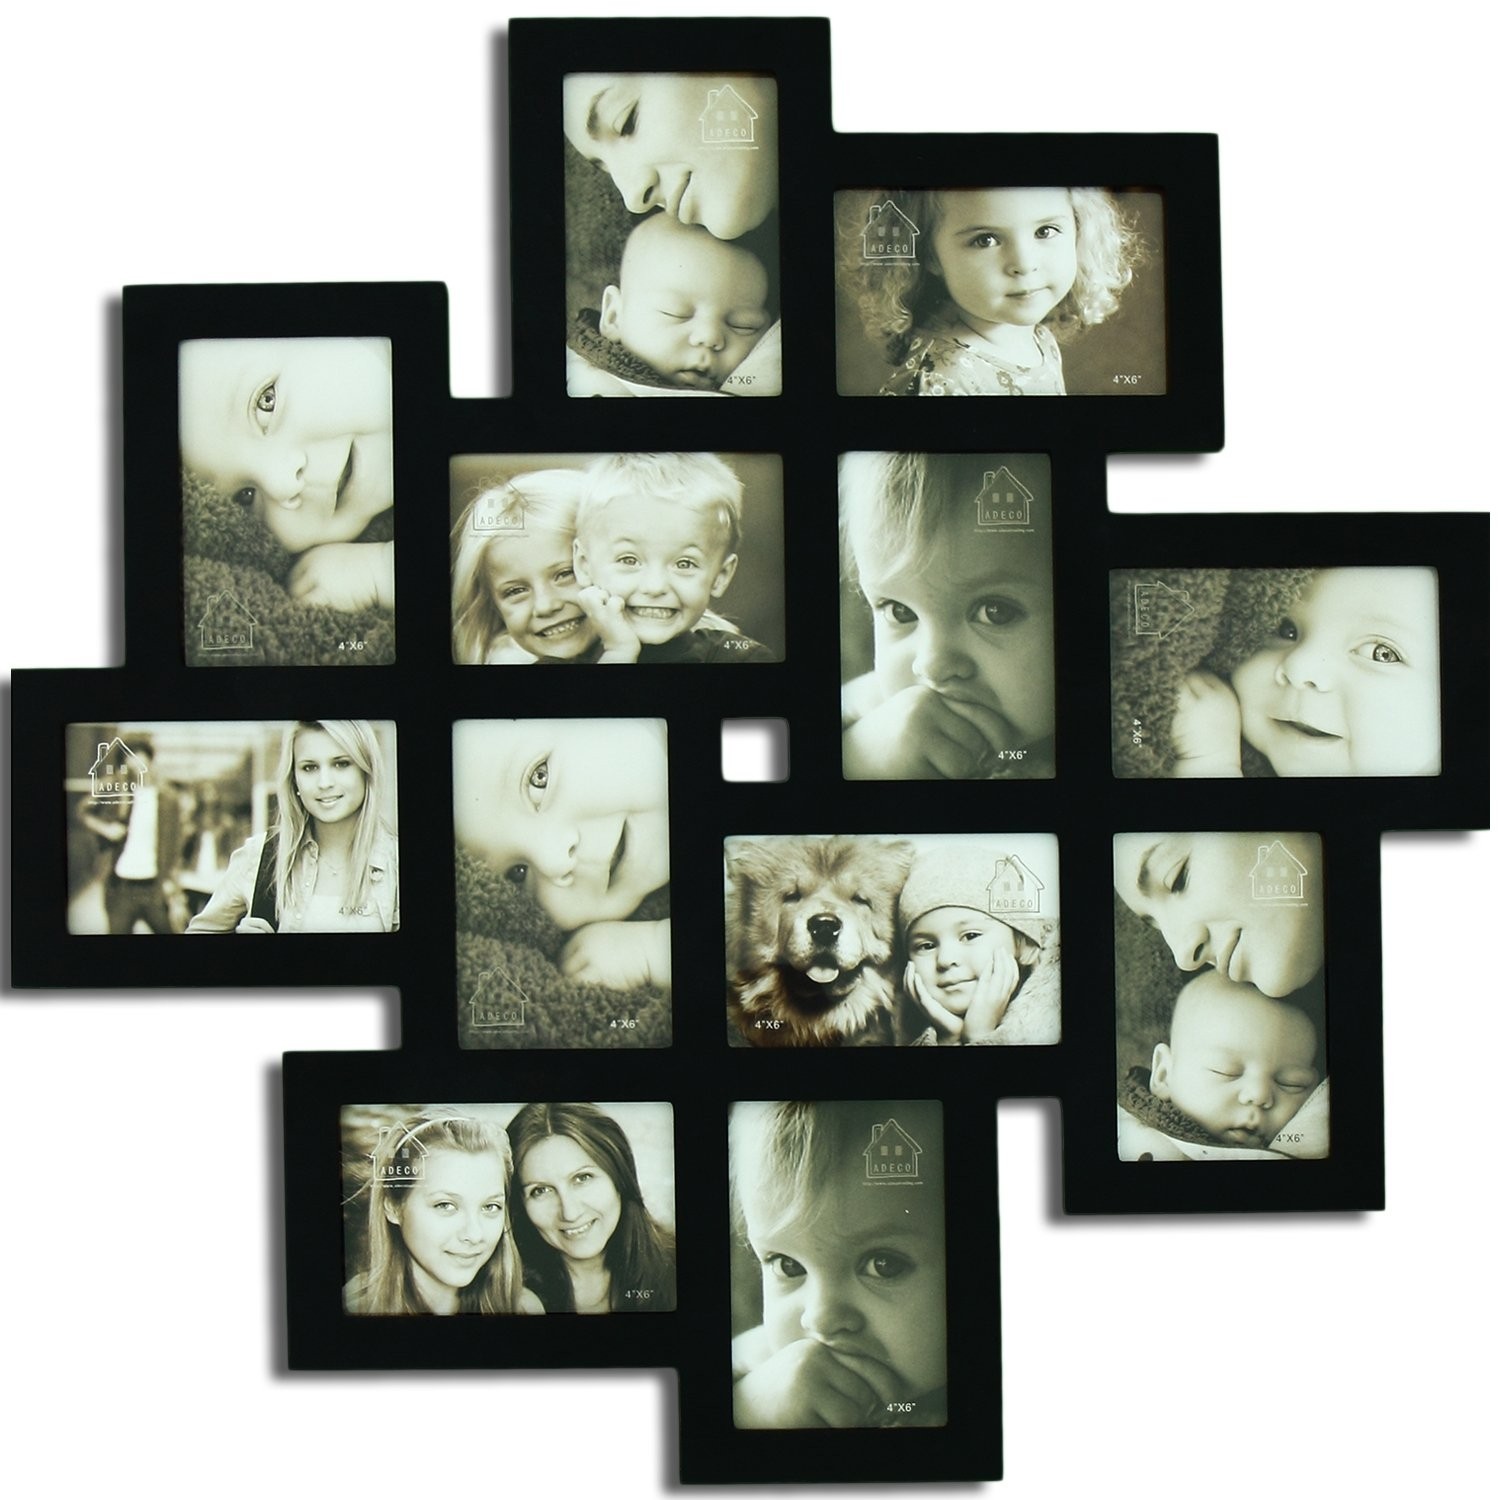 Adeco [PF0206] Decorative Black Wood Wall Hanging Collage Picture Photo Frame, 12 Openings, 4x6"